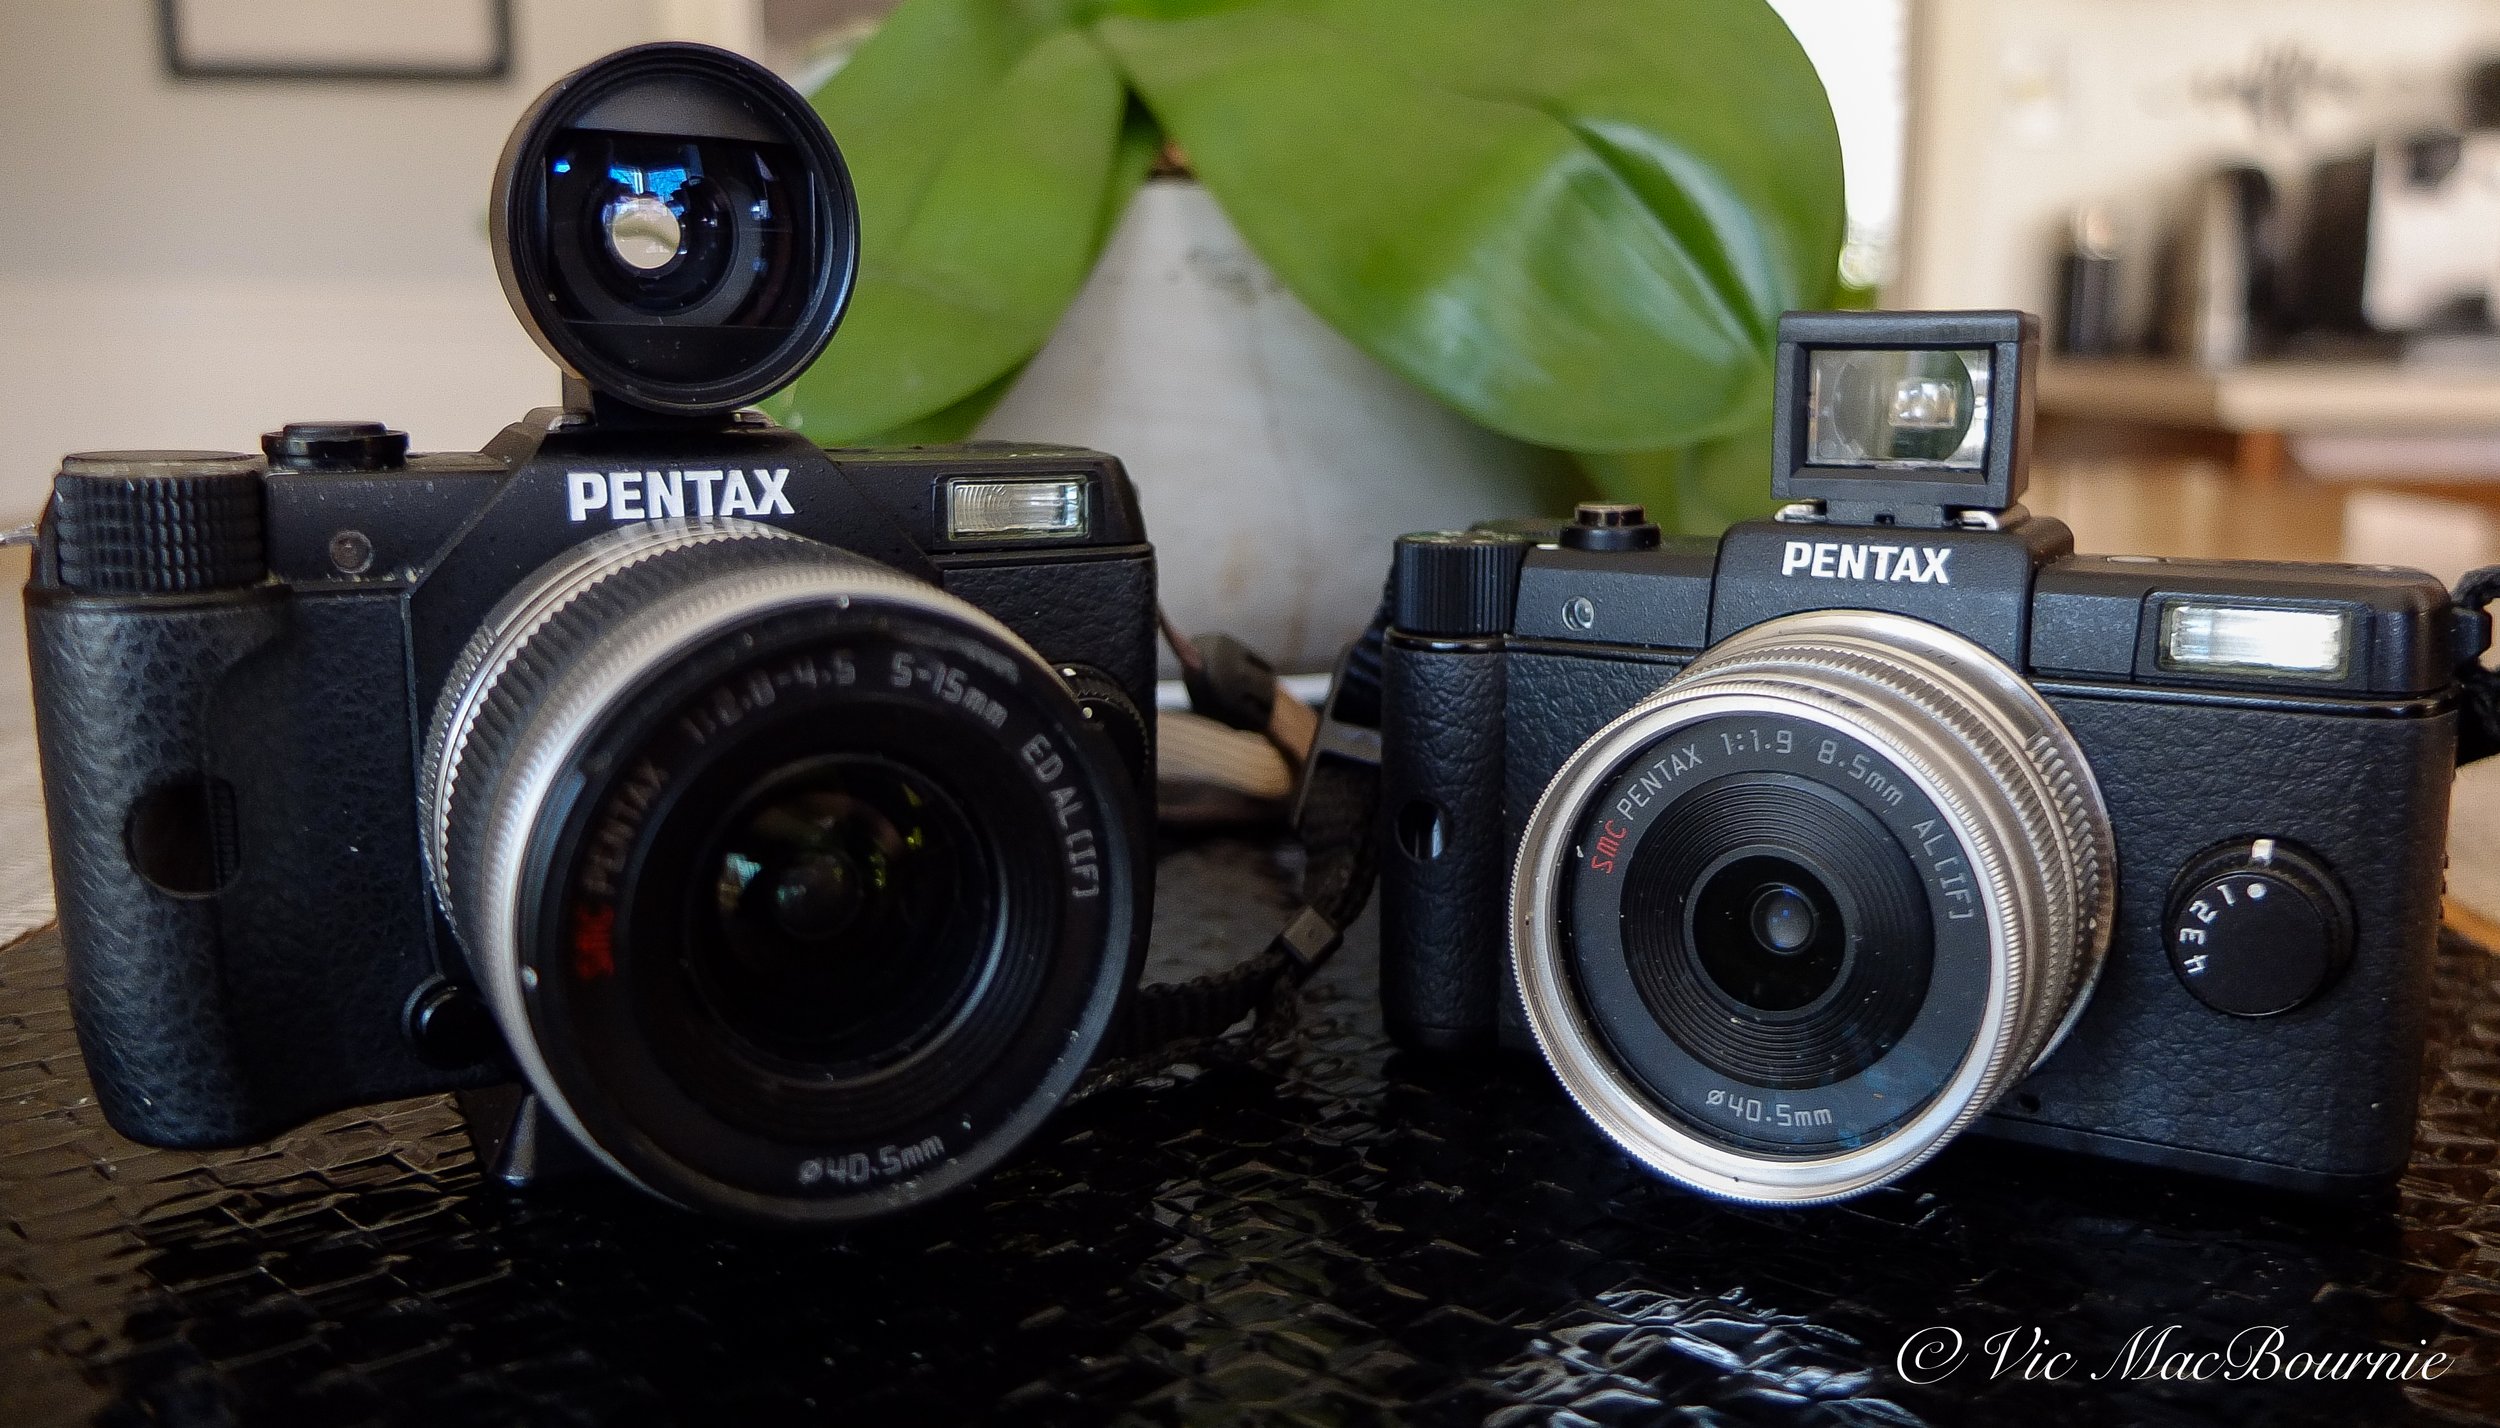 Two very different optional external viewfinders on the Pentax Qs. The TTArtisan on the left is much larger than the tiny Lichifit on the right.